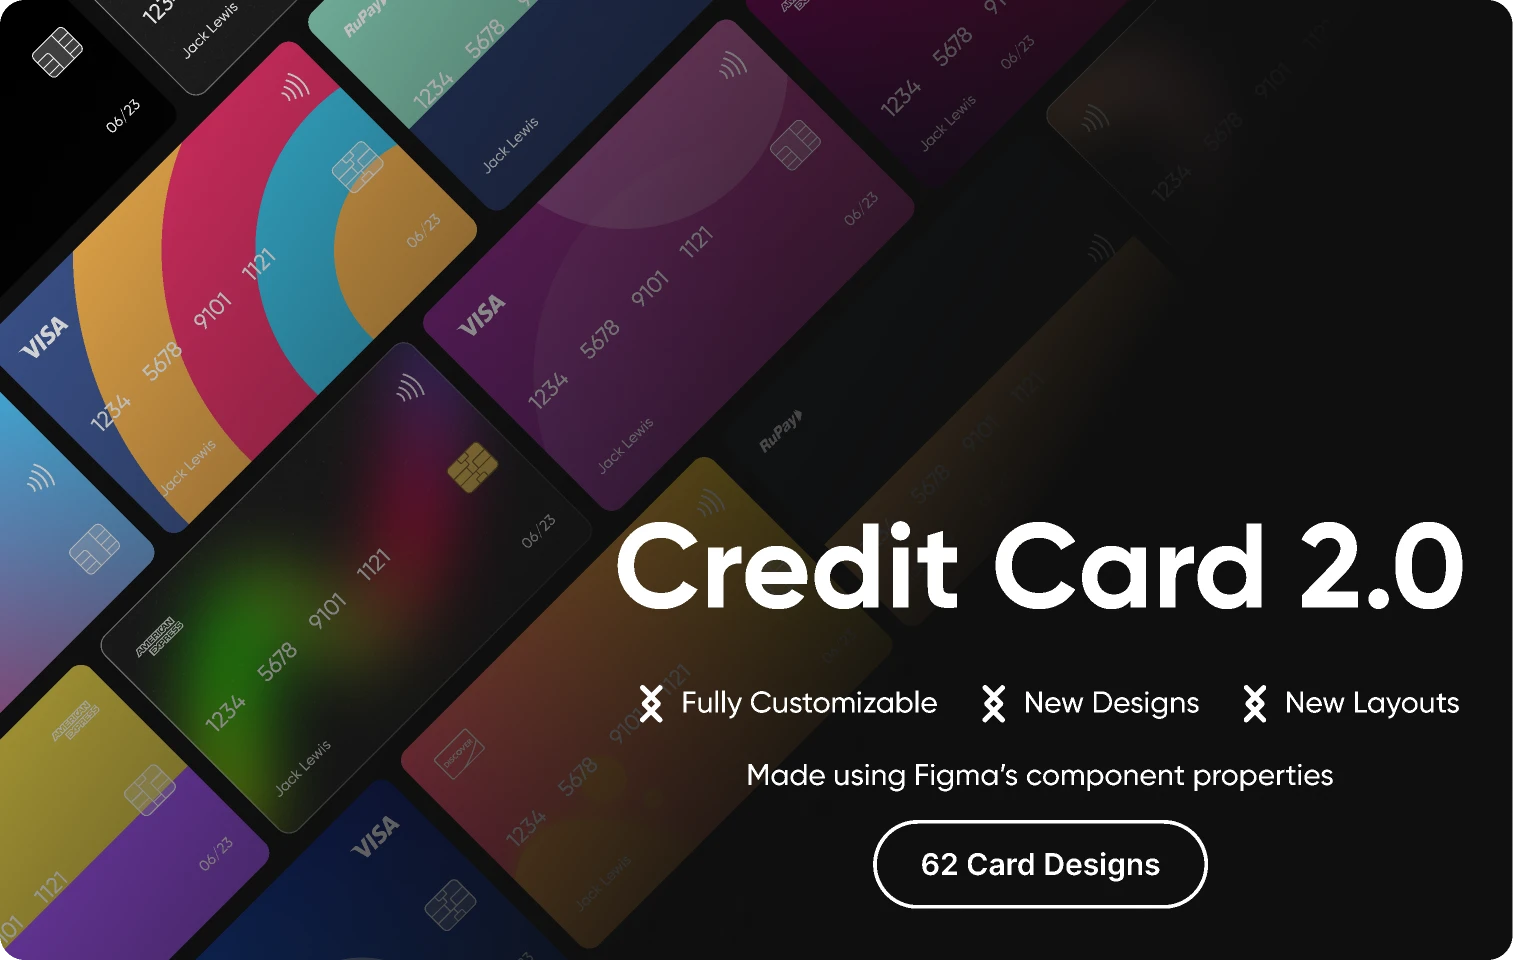 Credit Card 2.0 for Figma and Adobe XD